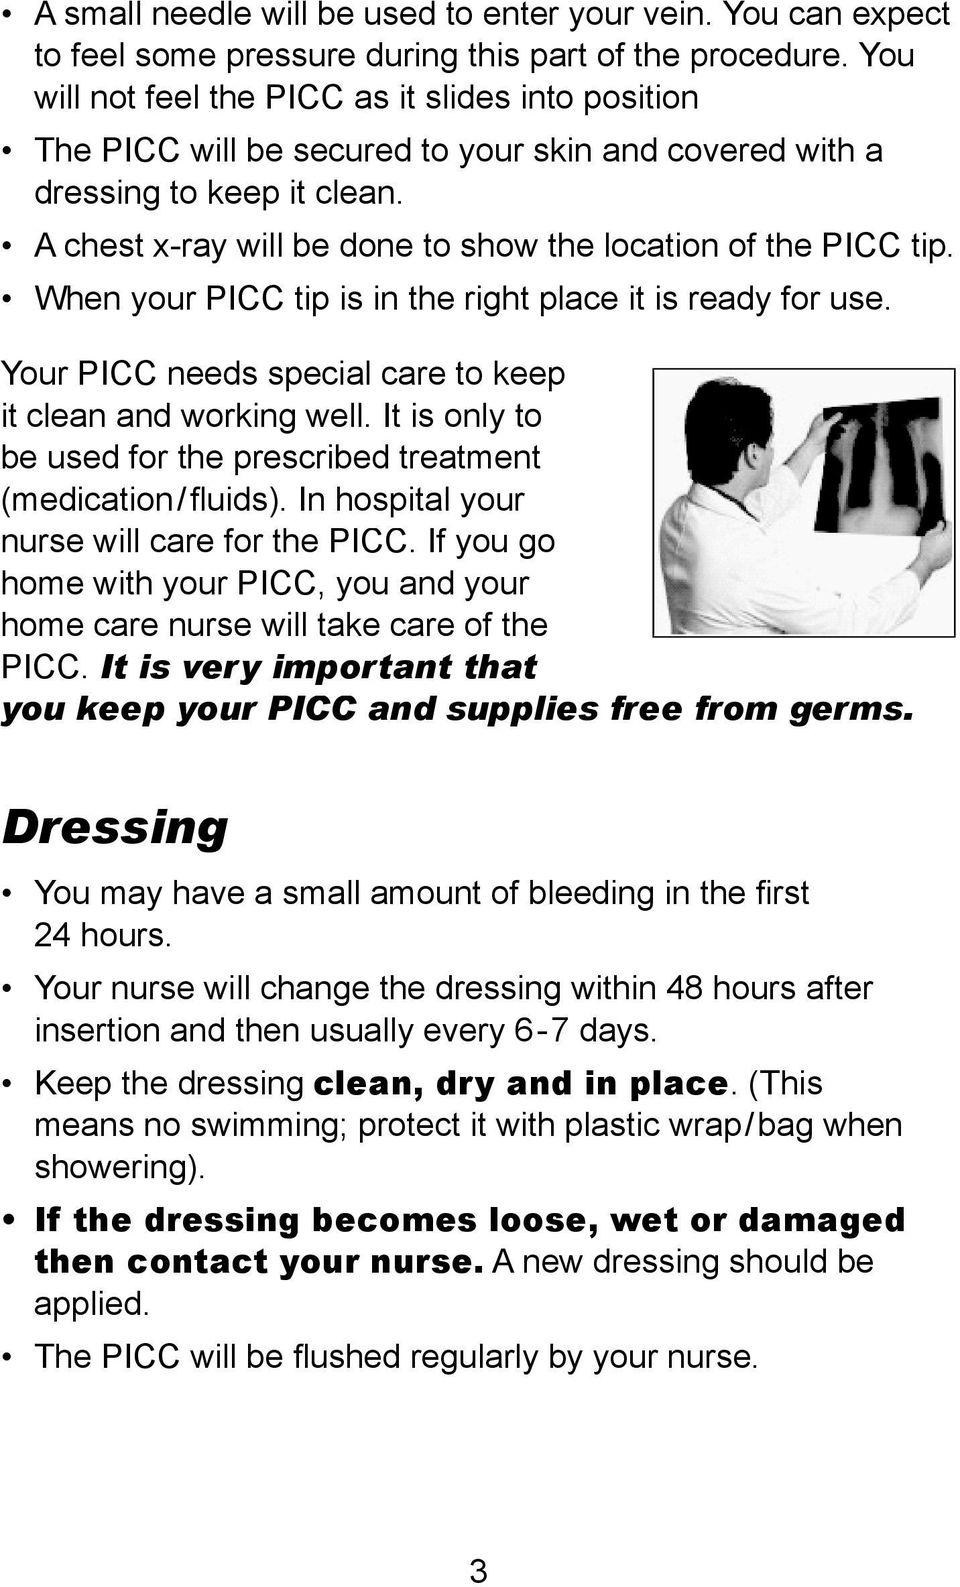 A chest x-ray will be done to show the location of the PICC tip. When your PICC tip is in the right place it is ready for use. Your PICC needs special care to keep it clean and working well.